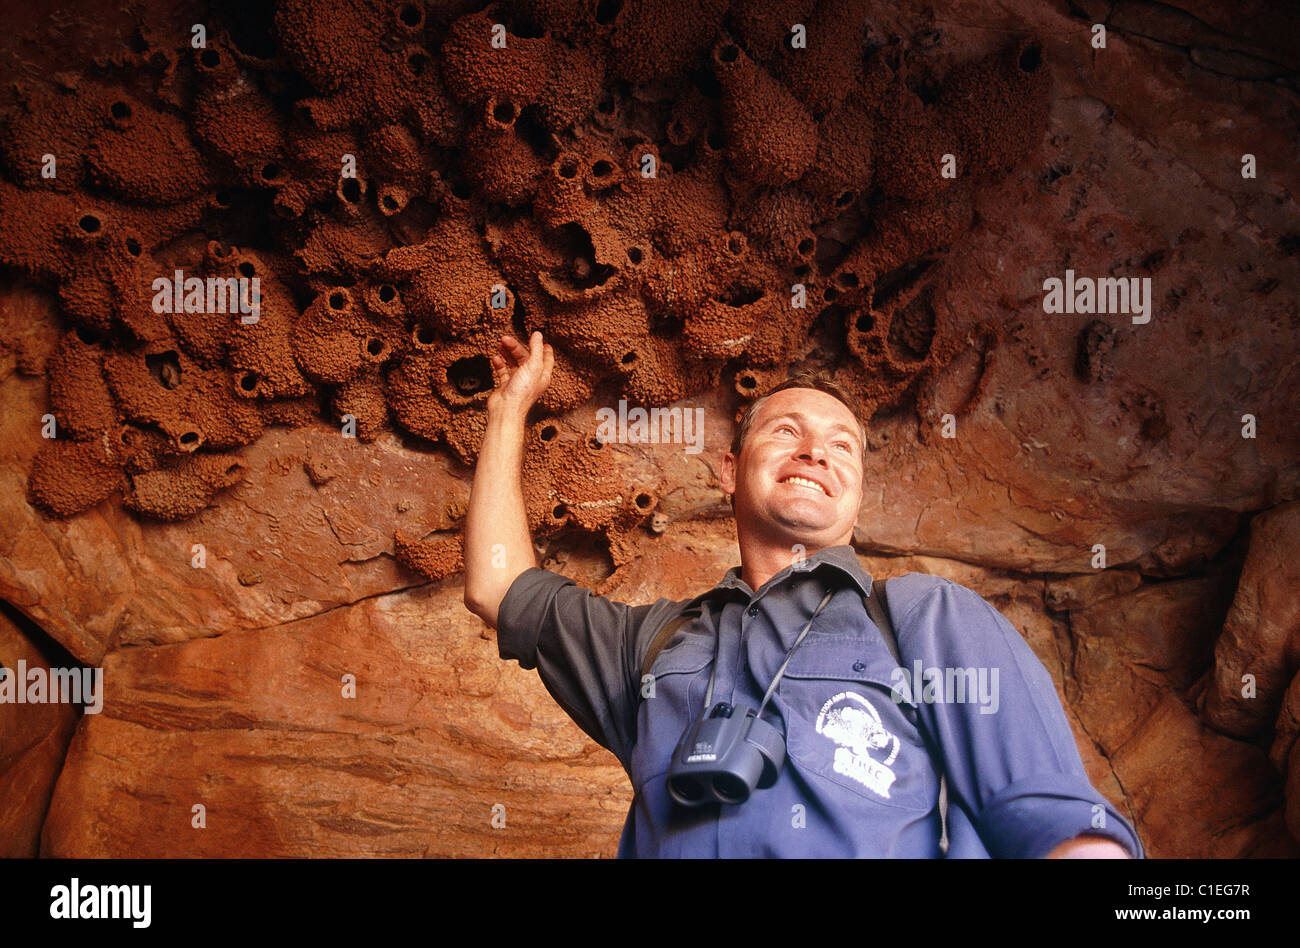 Australia, Northern Territory, Alice Springs, Ranger with tourists showing nests Stock Photo